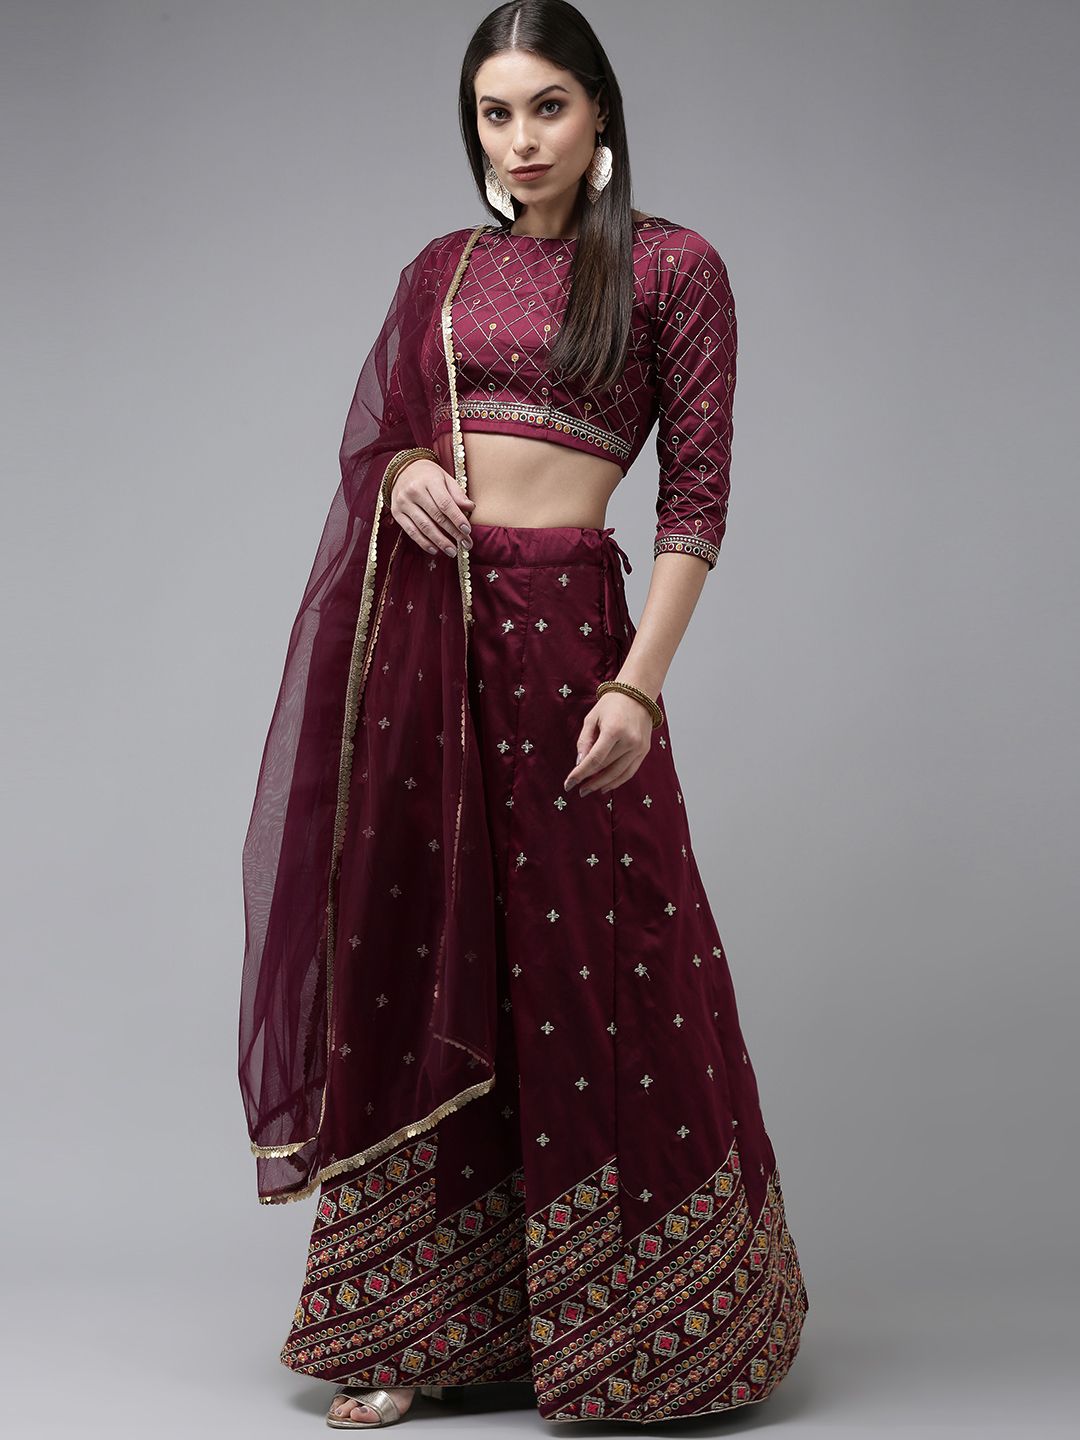 DIVASTRI Burgundy & Gold-Toned Embellished Semi-Stitched Lehenga & Unstitched Blouse With Dupatta Price in India